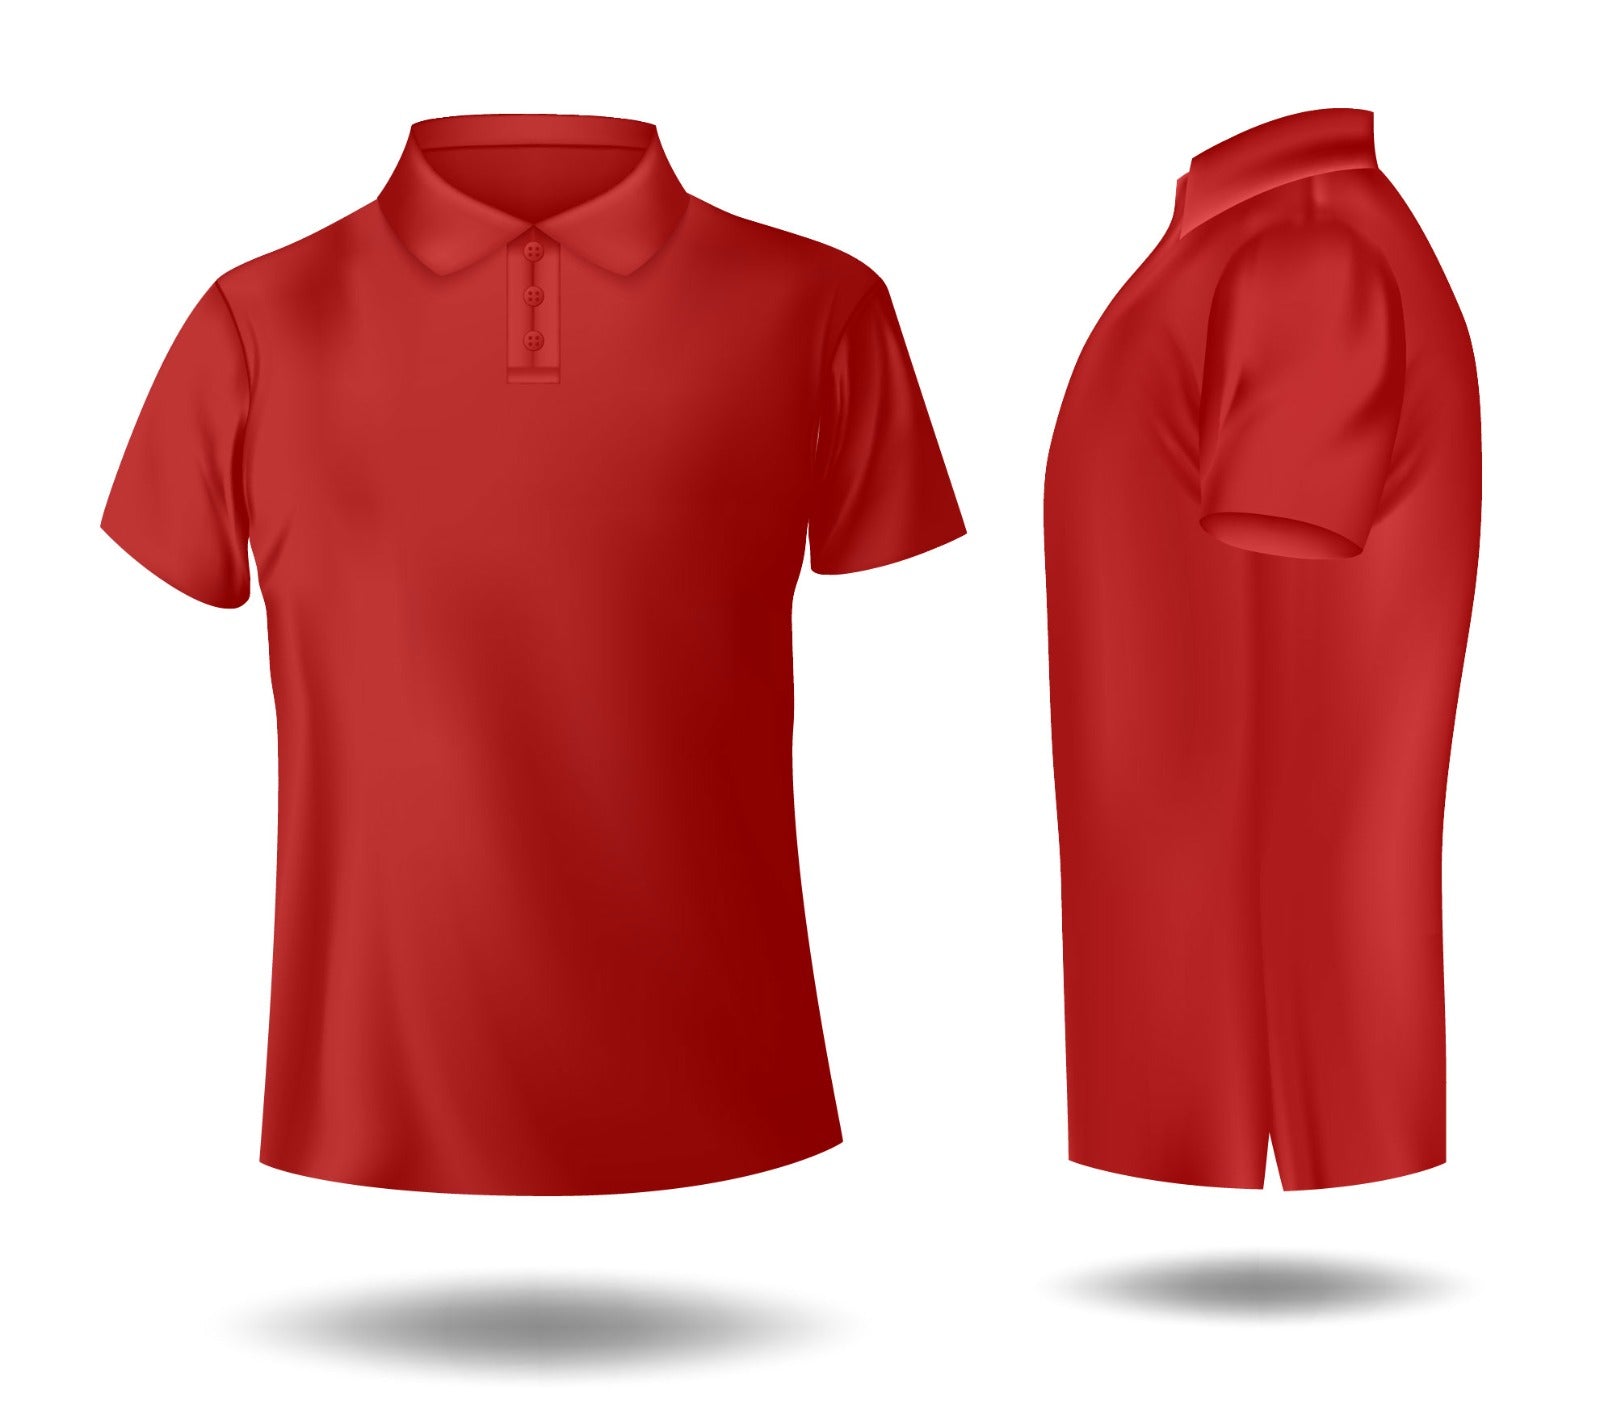 Red polo shirt for kids